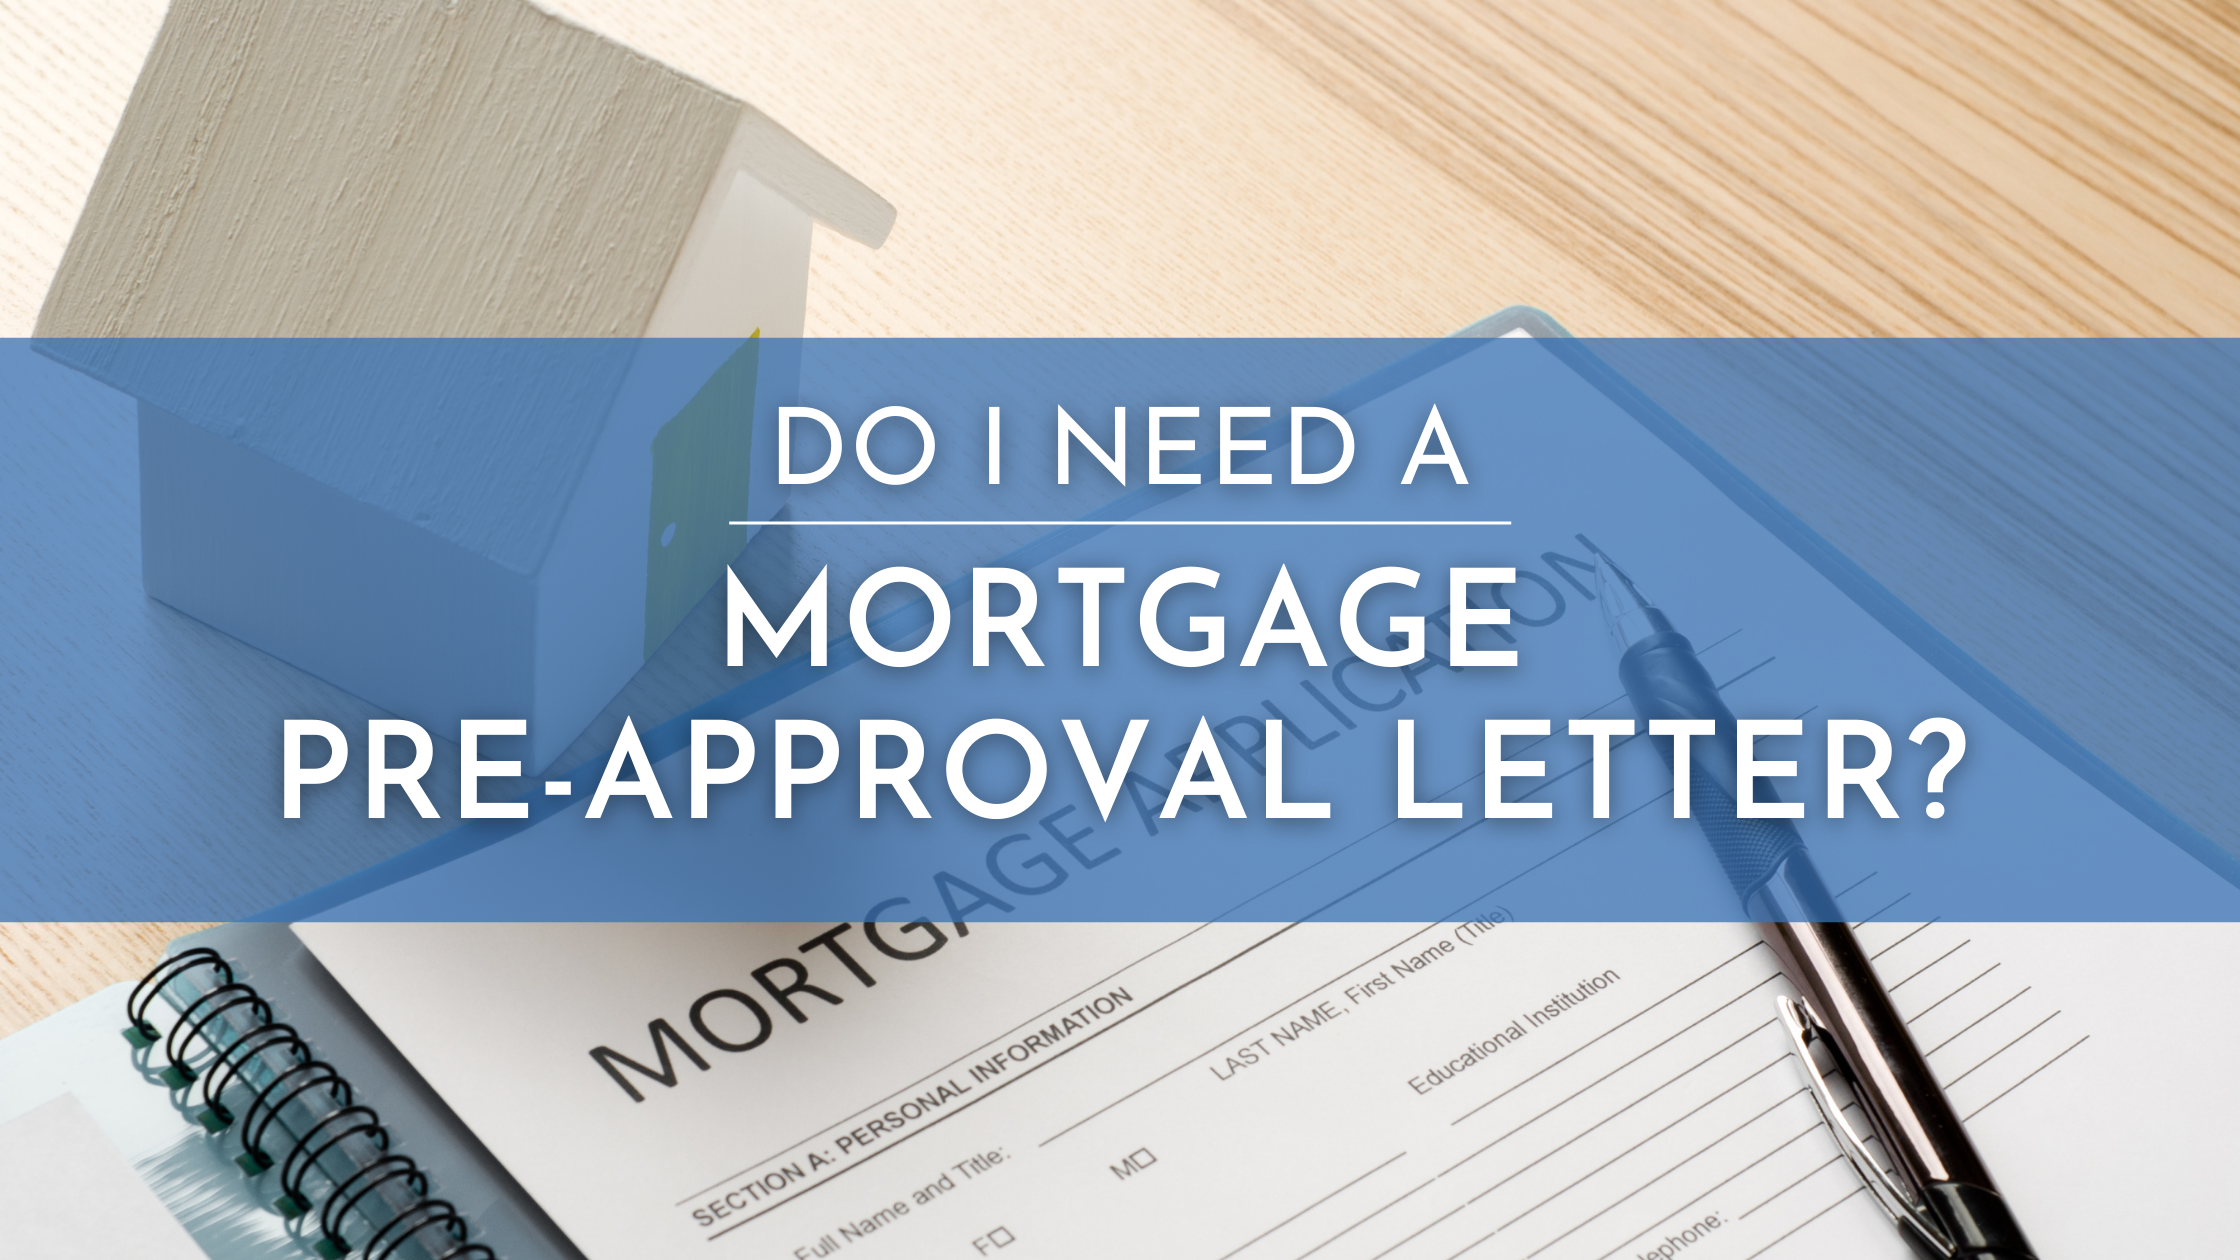 Do I Need a Mortgage Pre-Approval Letter?